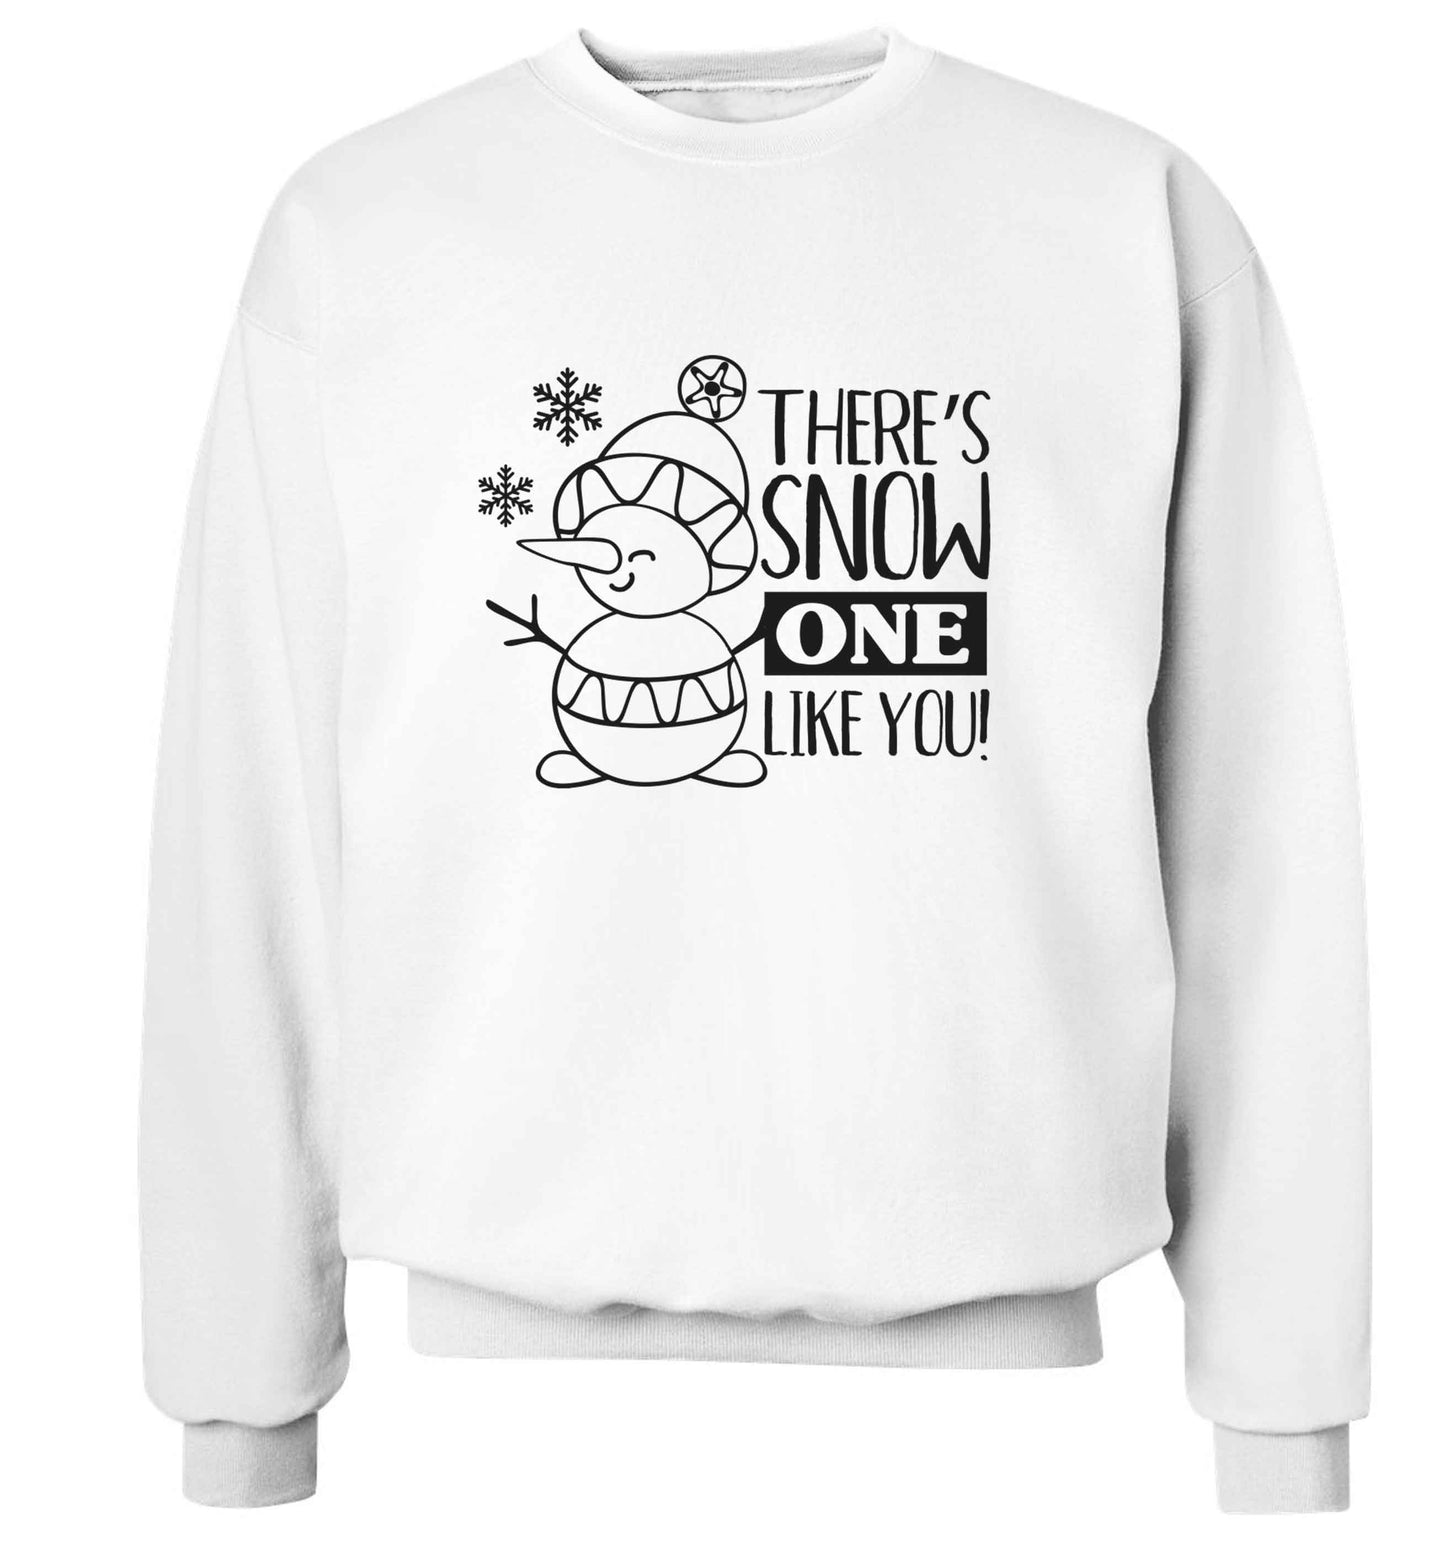 There's snow one like you adult's unisex white sweater 2XL